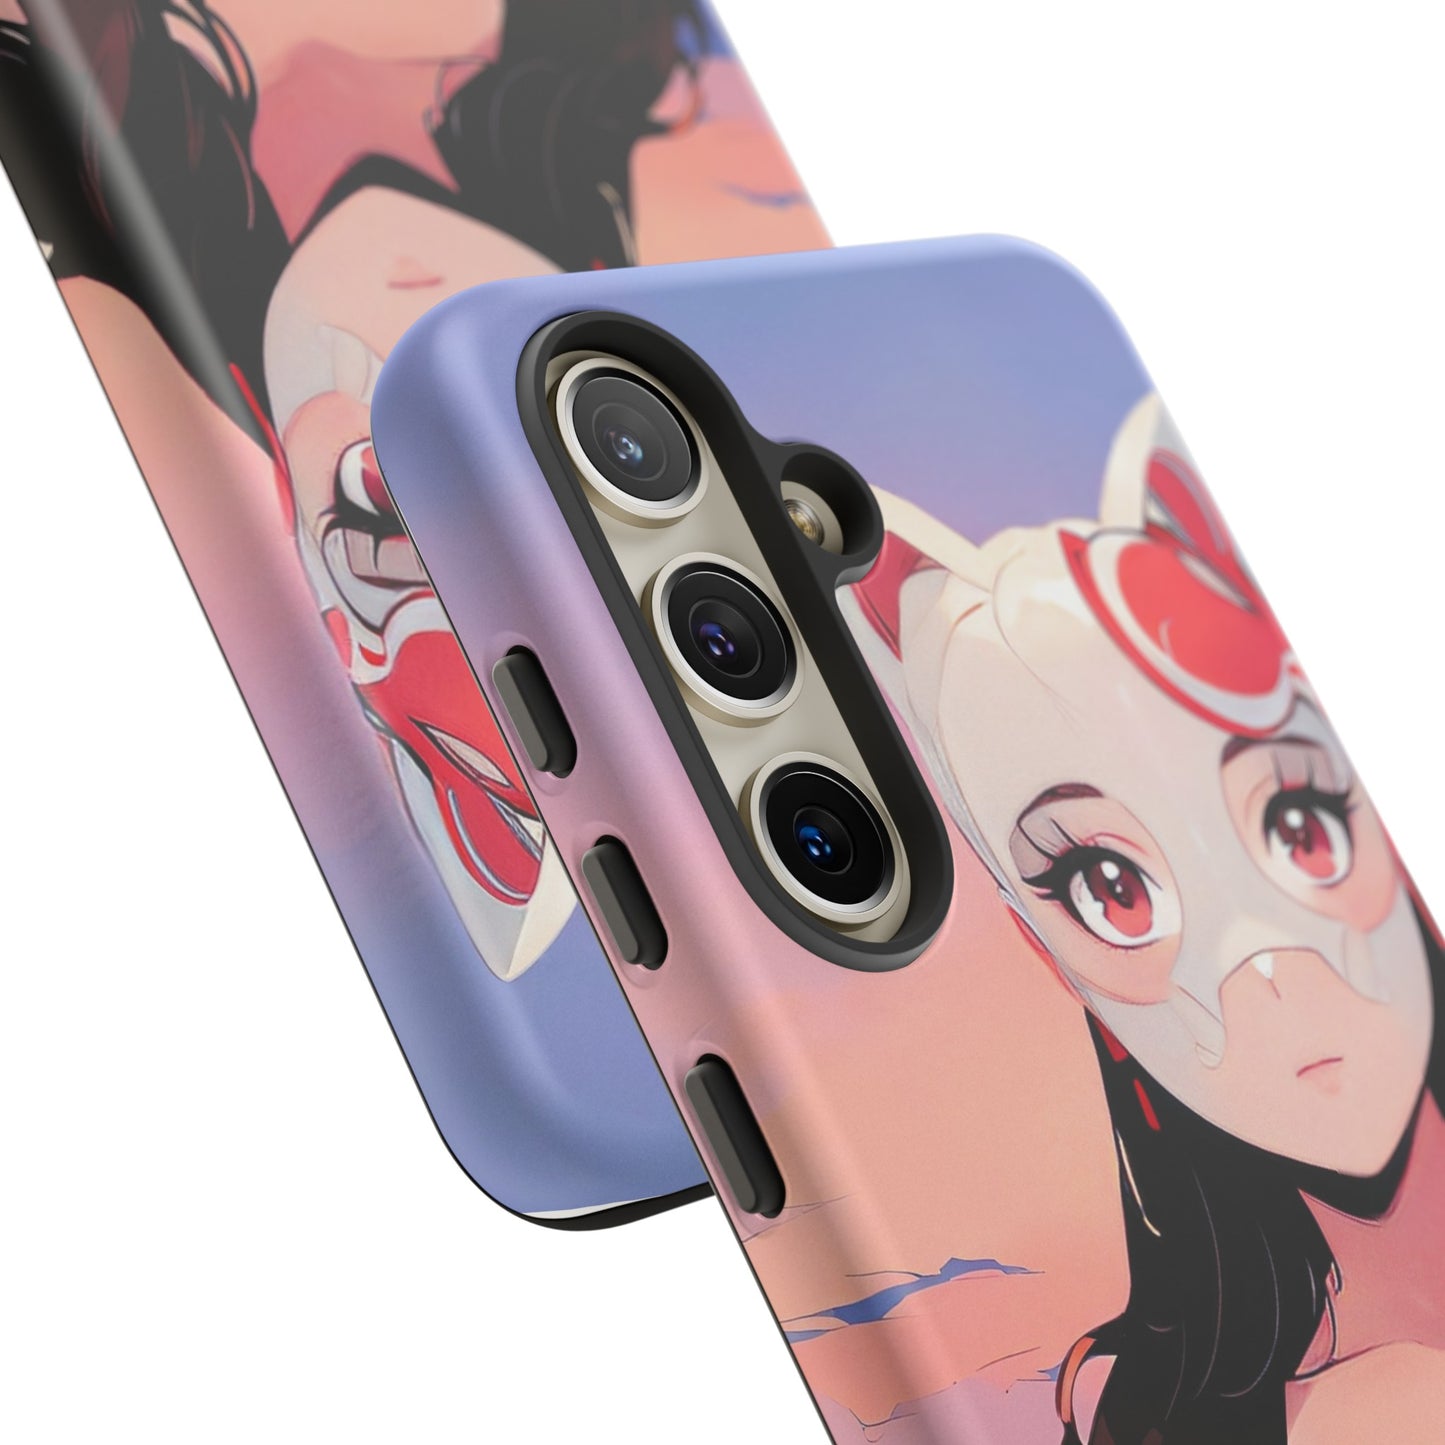 Anime Style Art Tough Cases- "Busty Sunset"